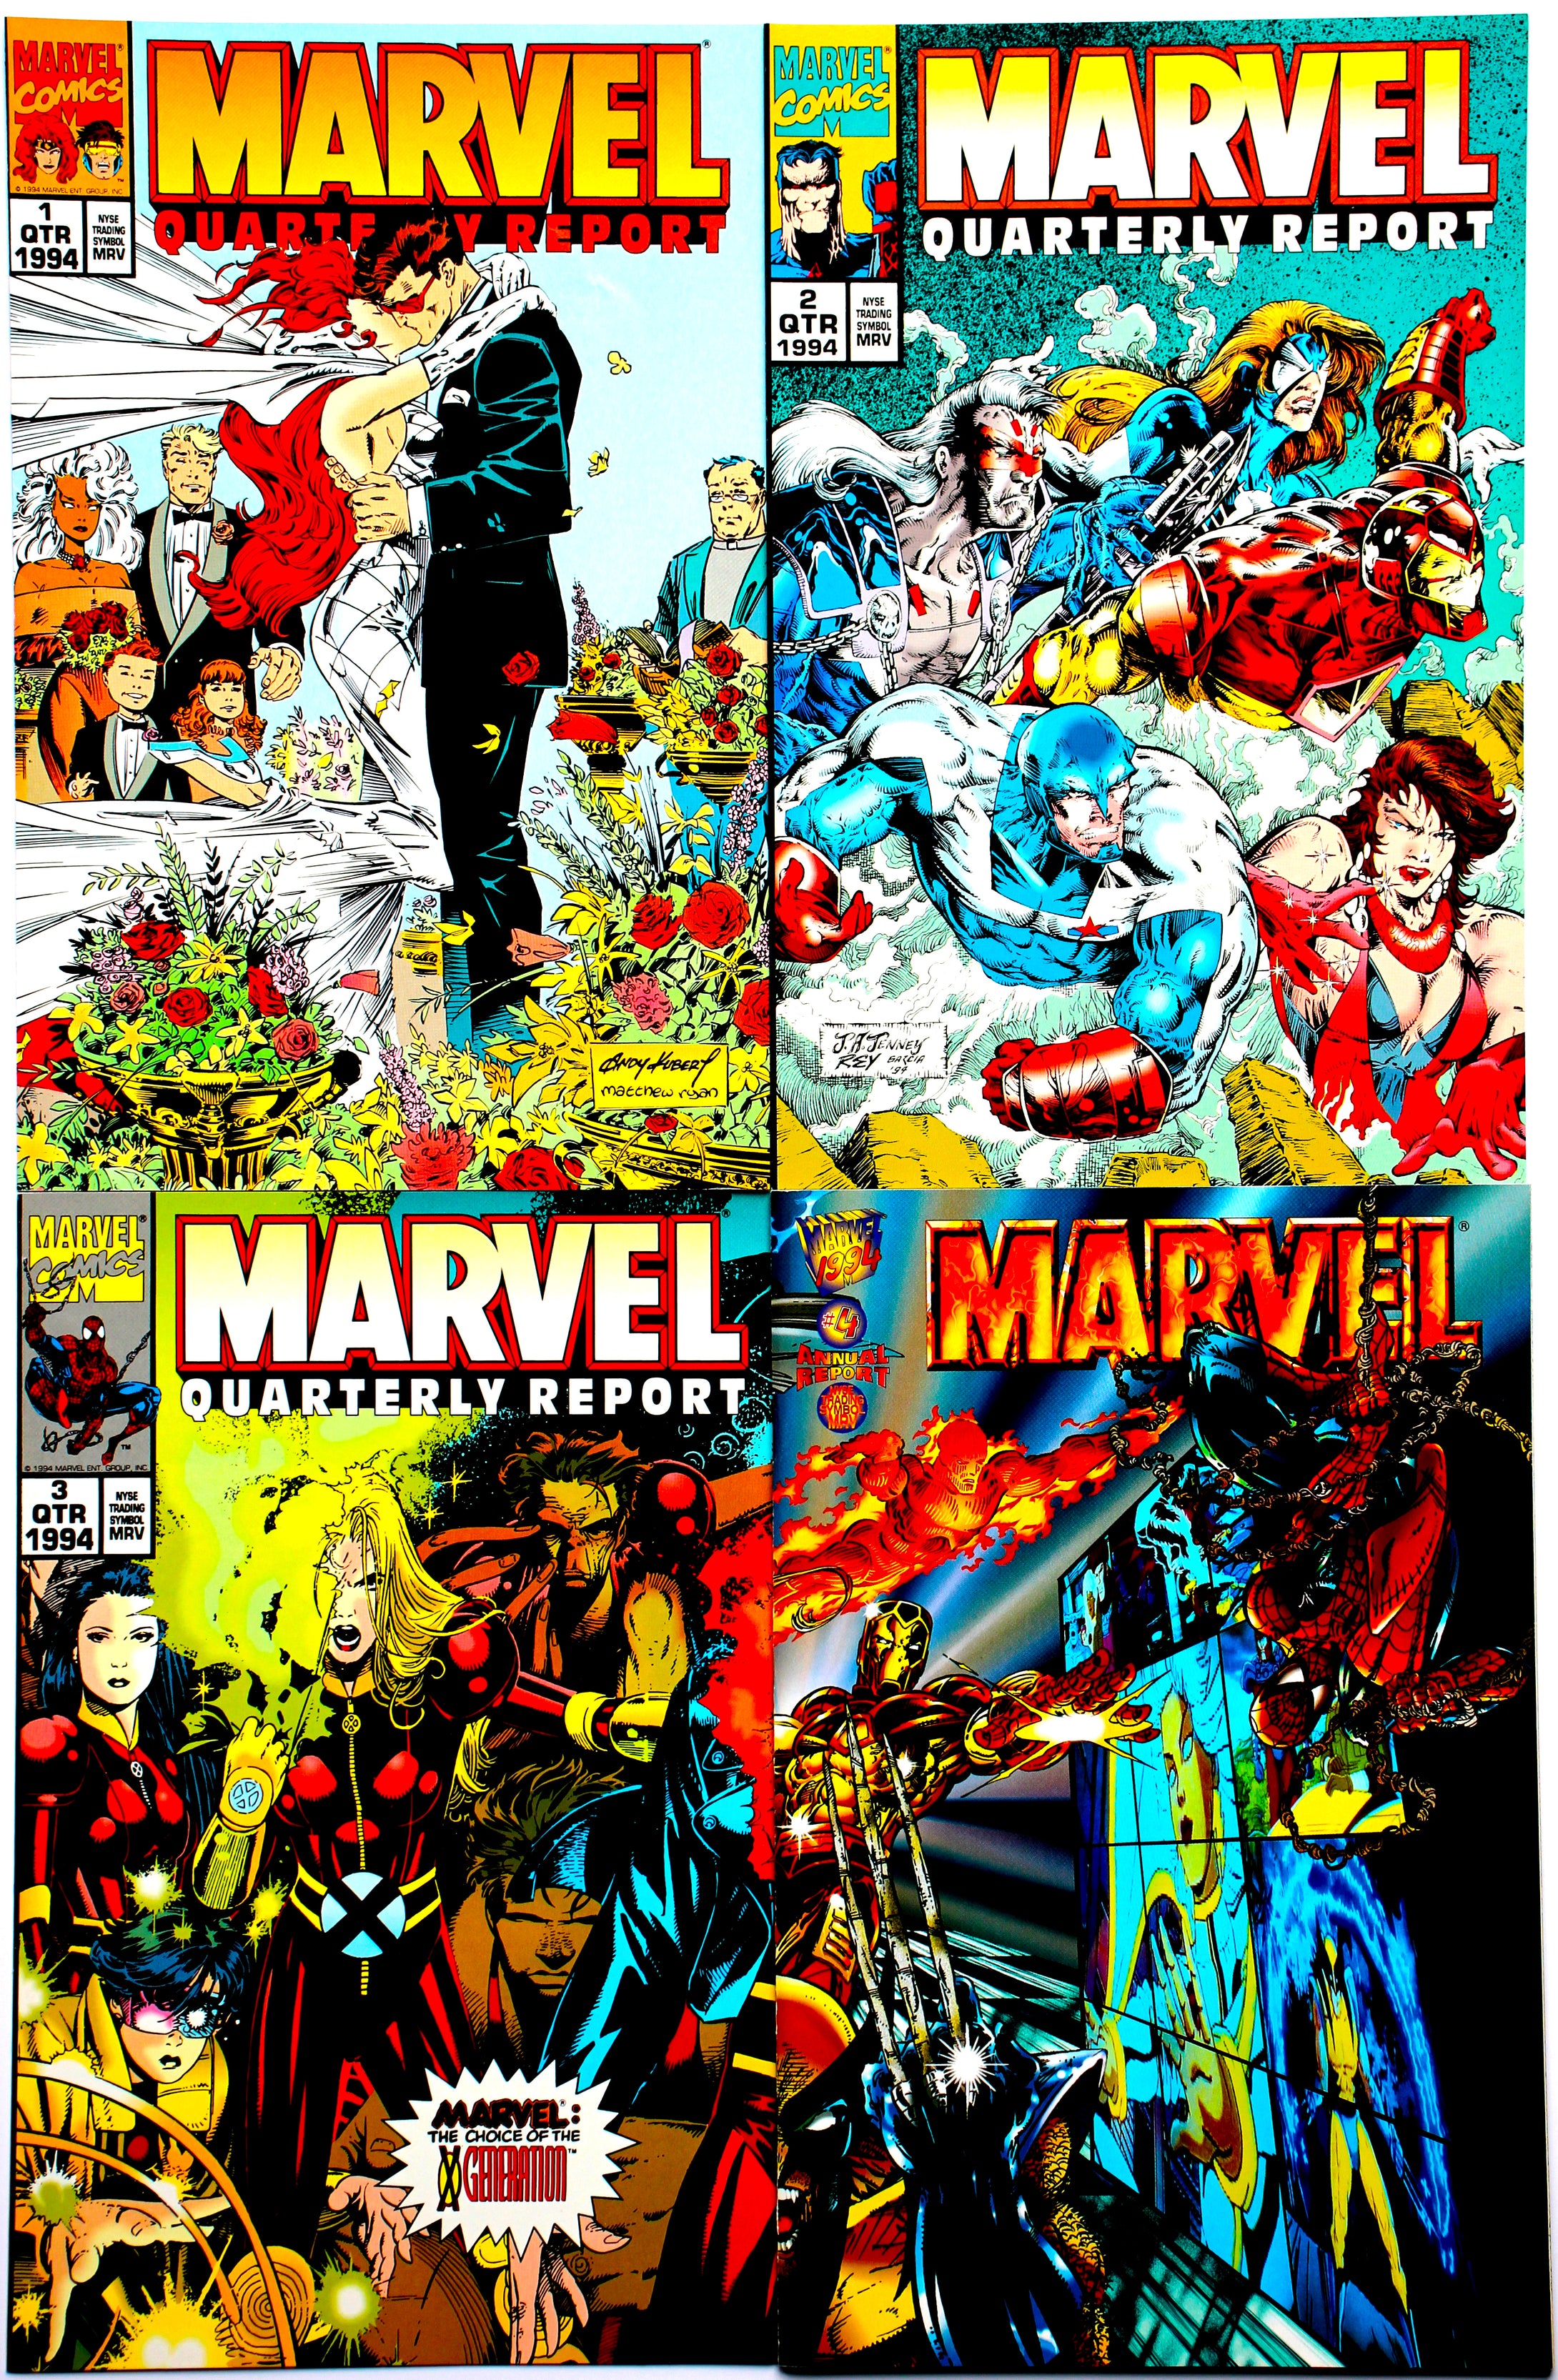 1994 Marvel Comics Quarterly and Annual Reports - NYSE - Complete Set - Wall Street Treasures